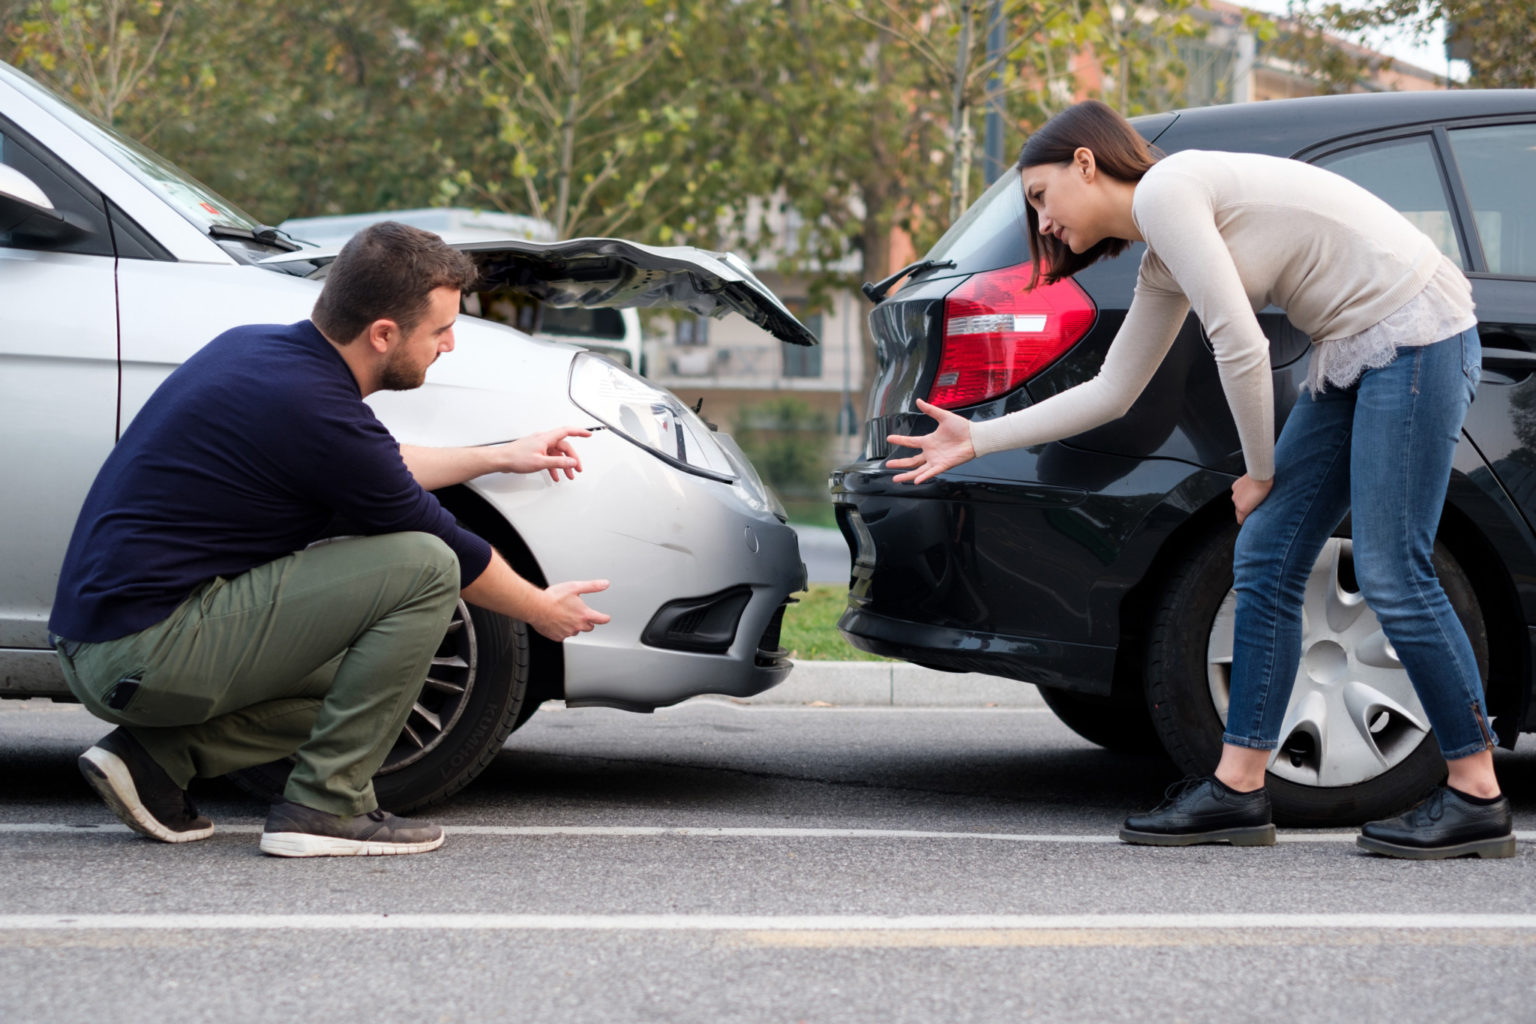 Not At Fault Car Insurance & Accidents - INSURANCE MANEUVERS